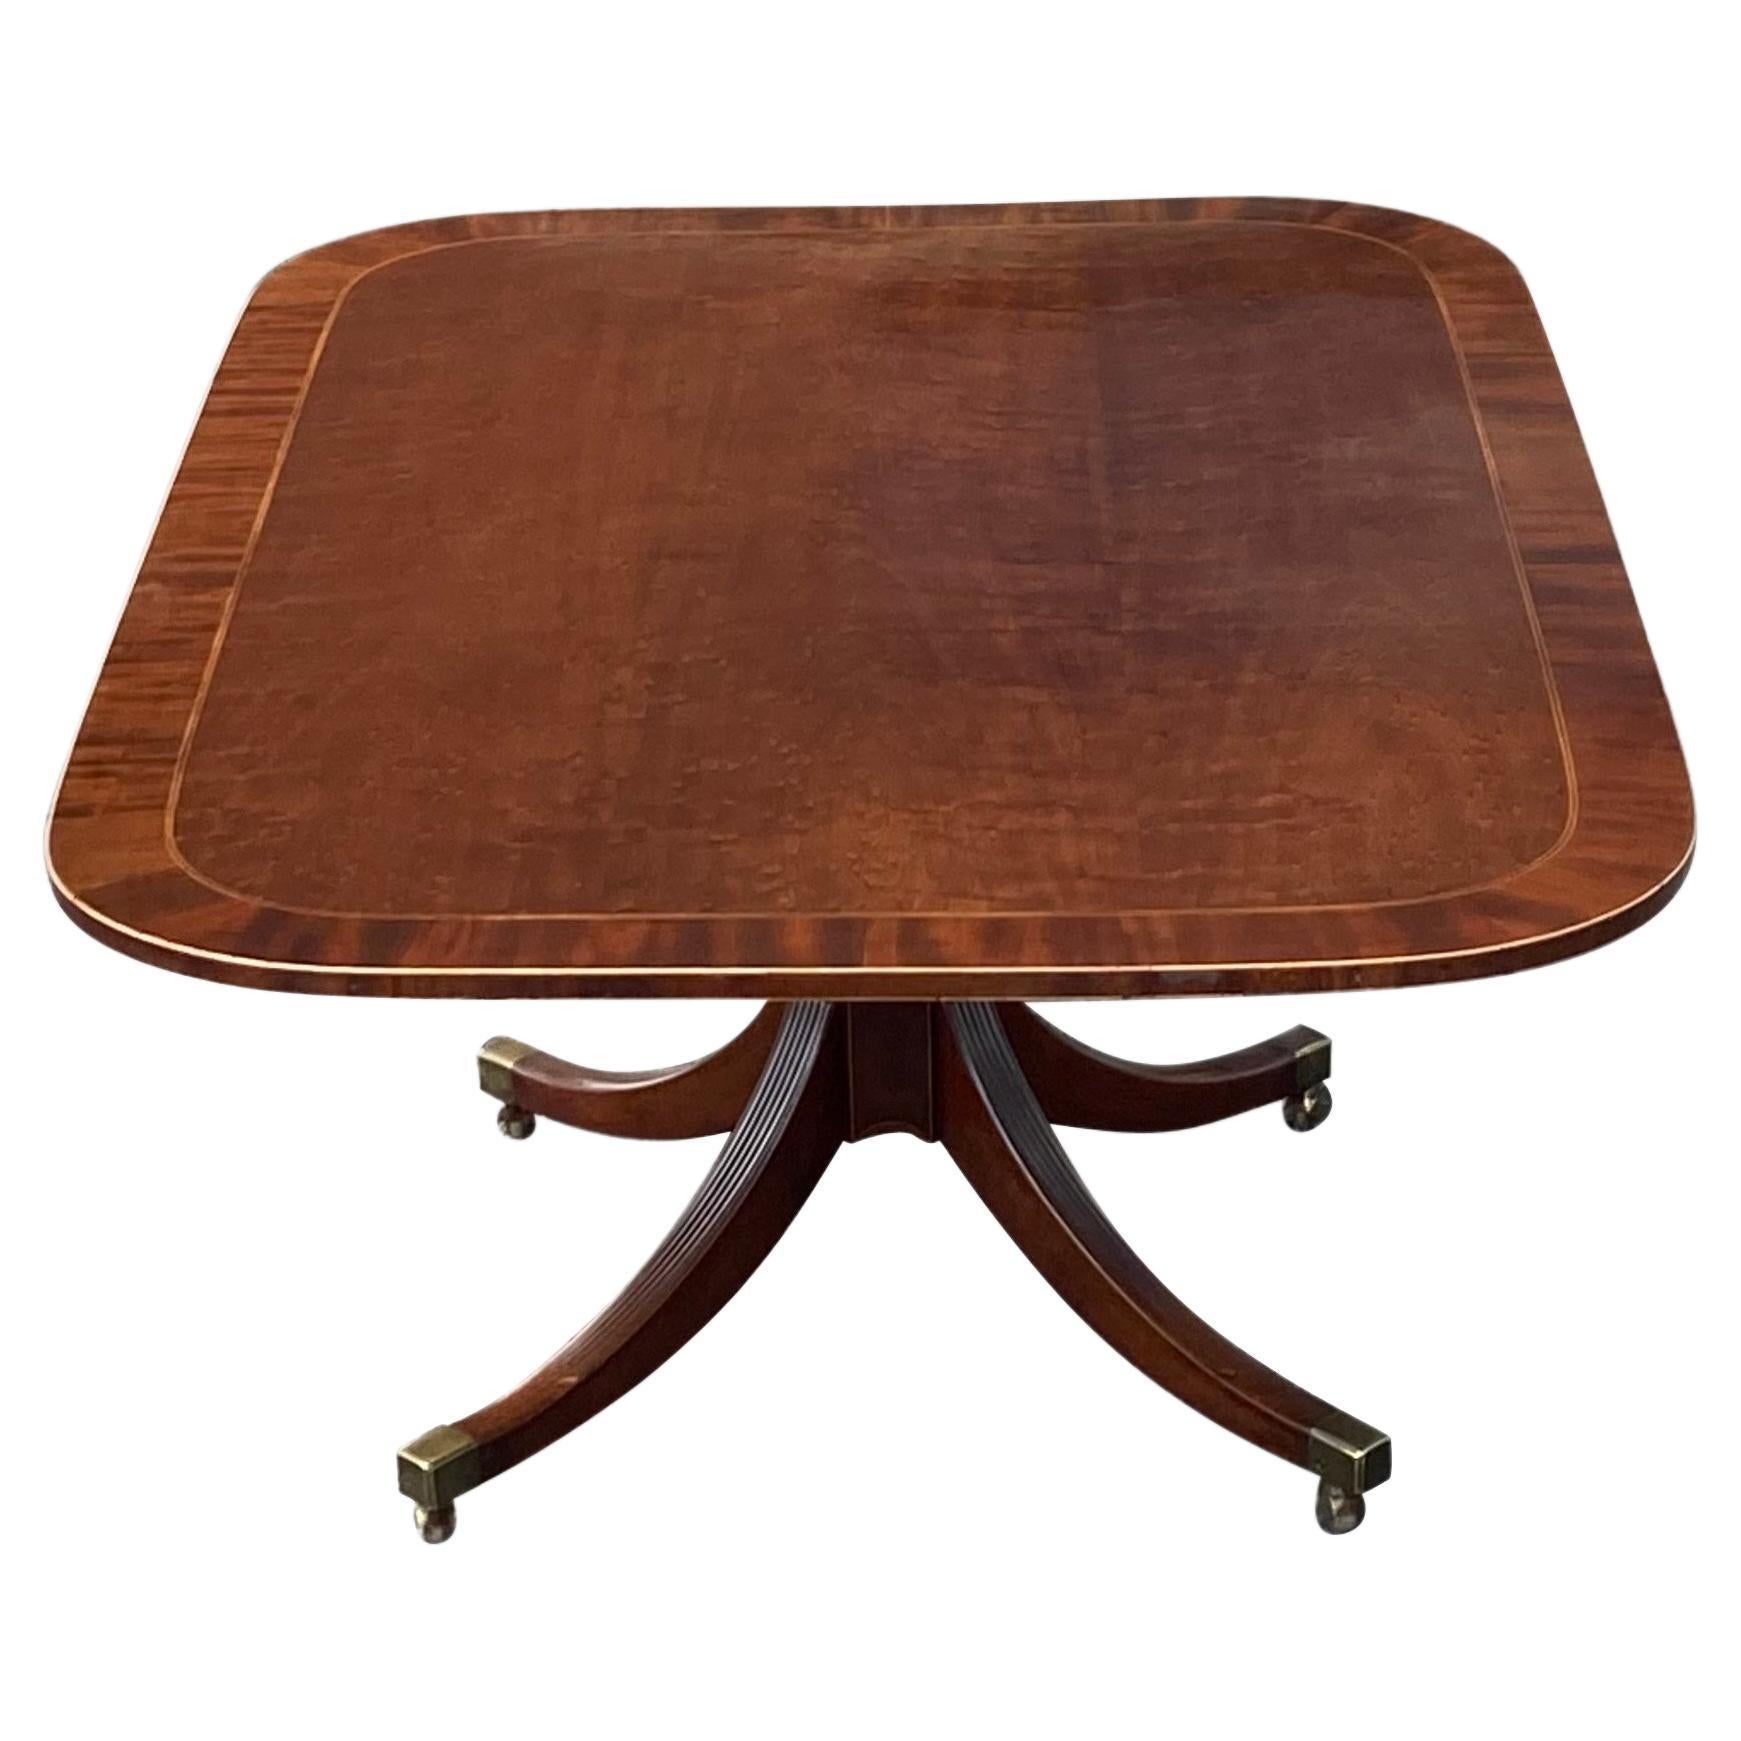 George III Mahogany & Inlaid Sheraton Period Tilt Top Dining Table For Sale